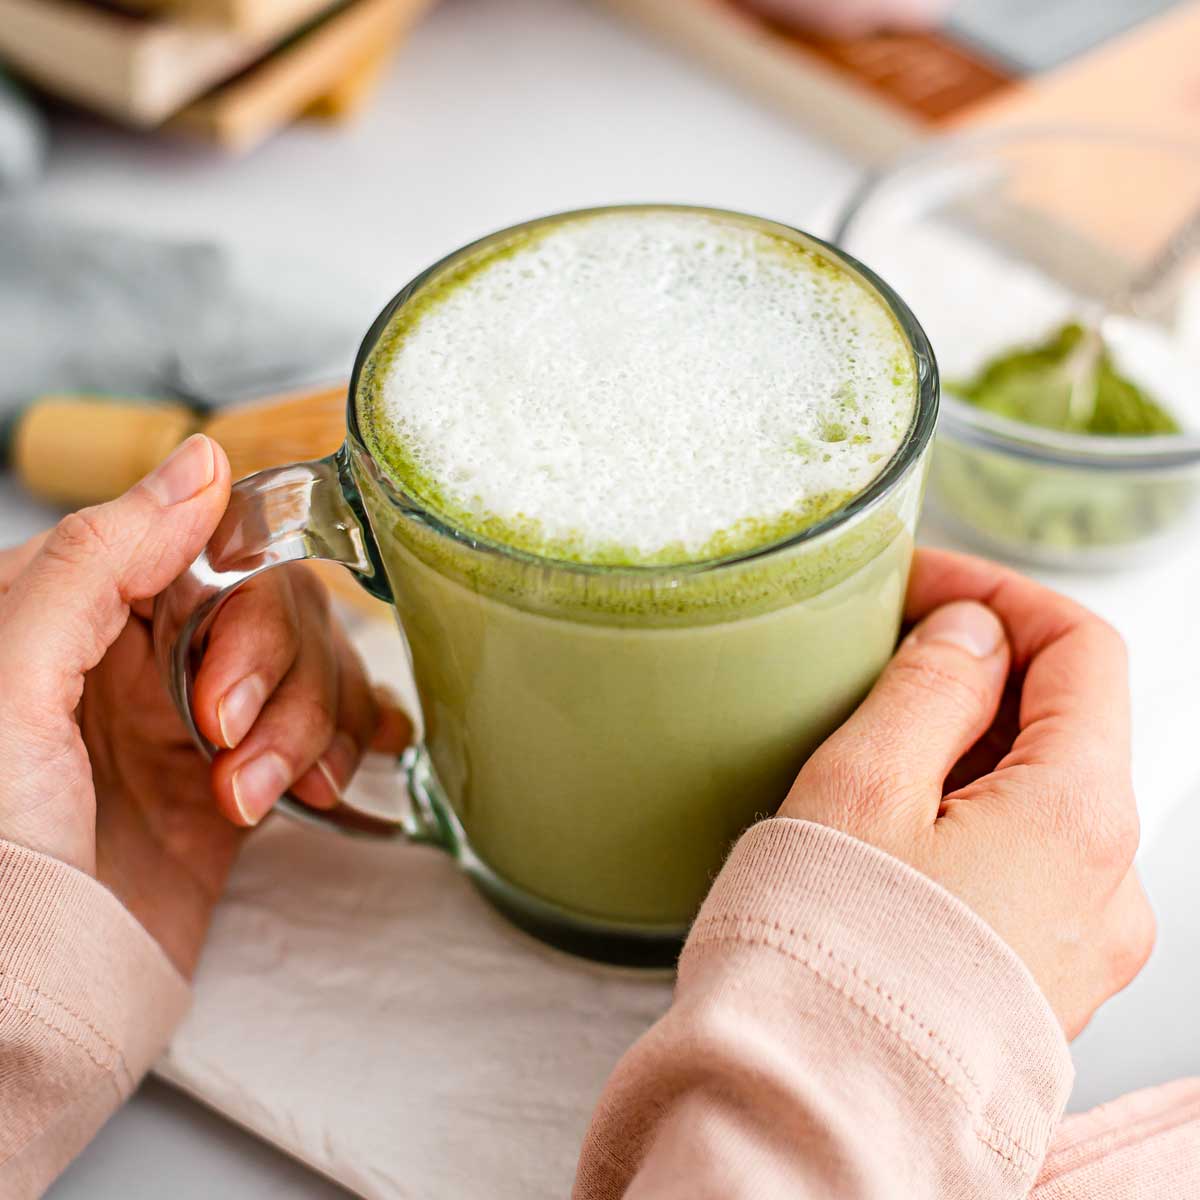 What Is A Matcha Latte?